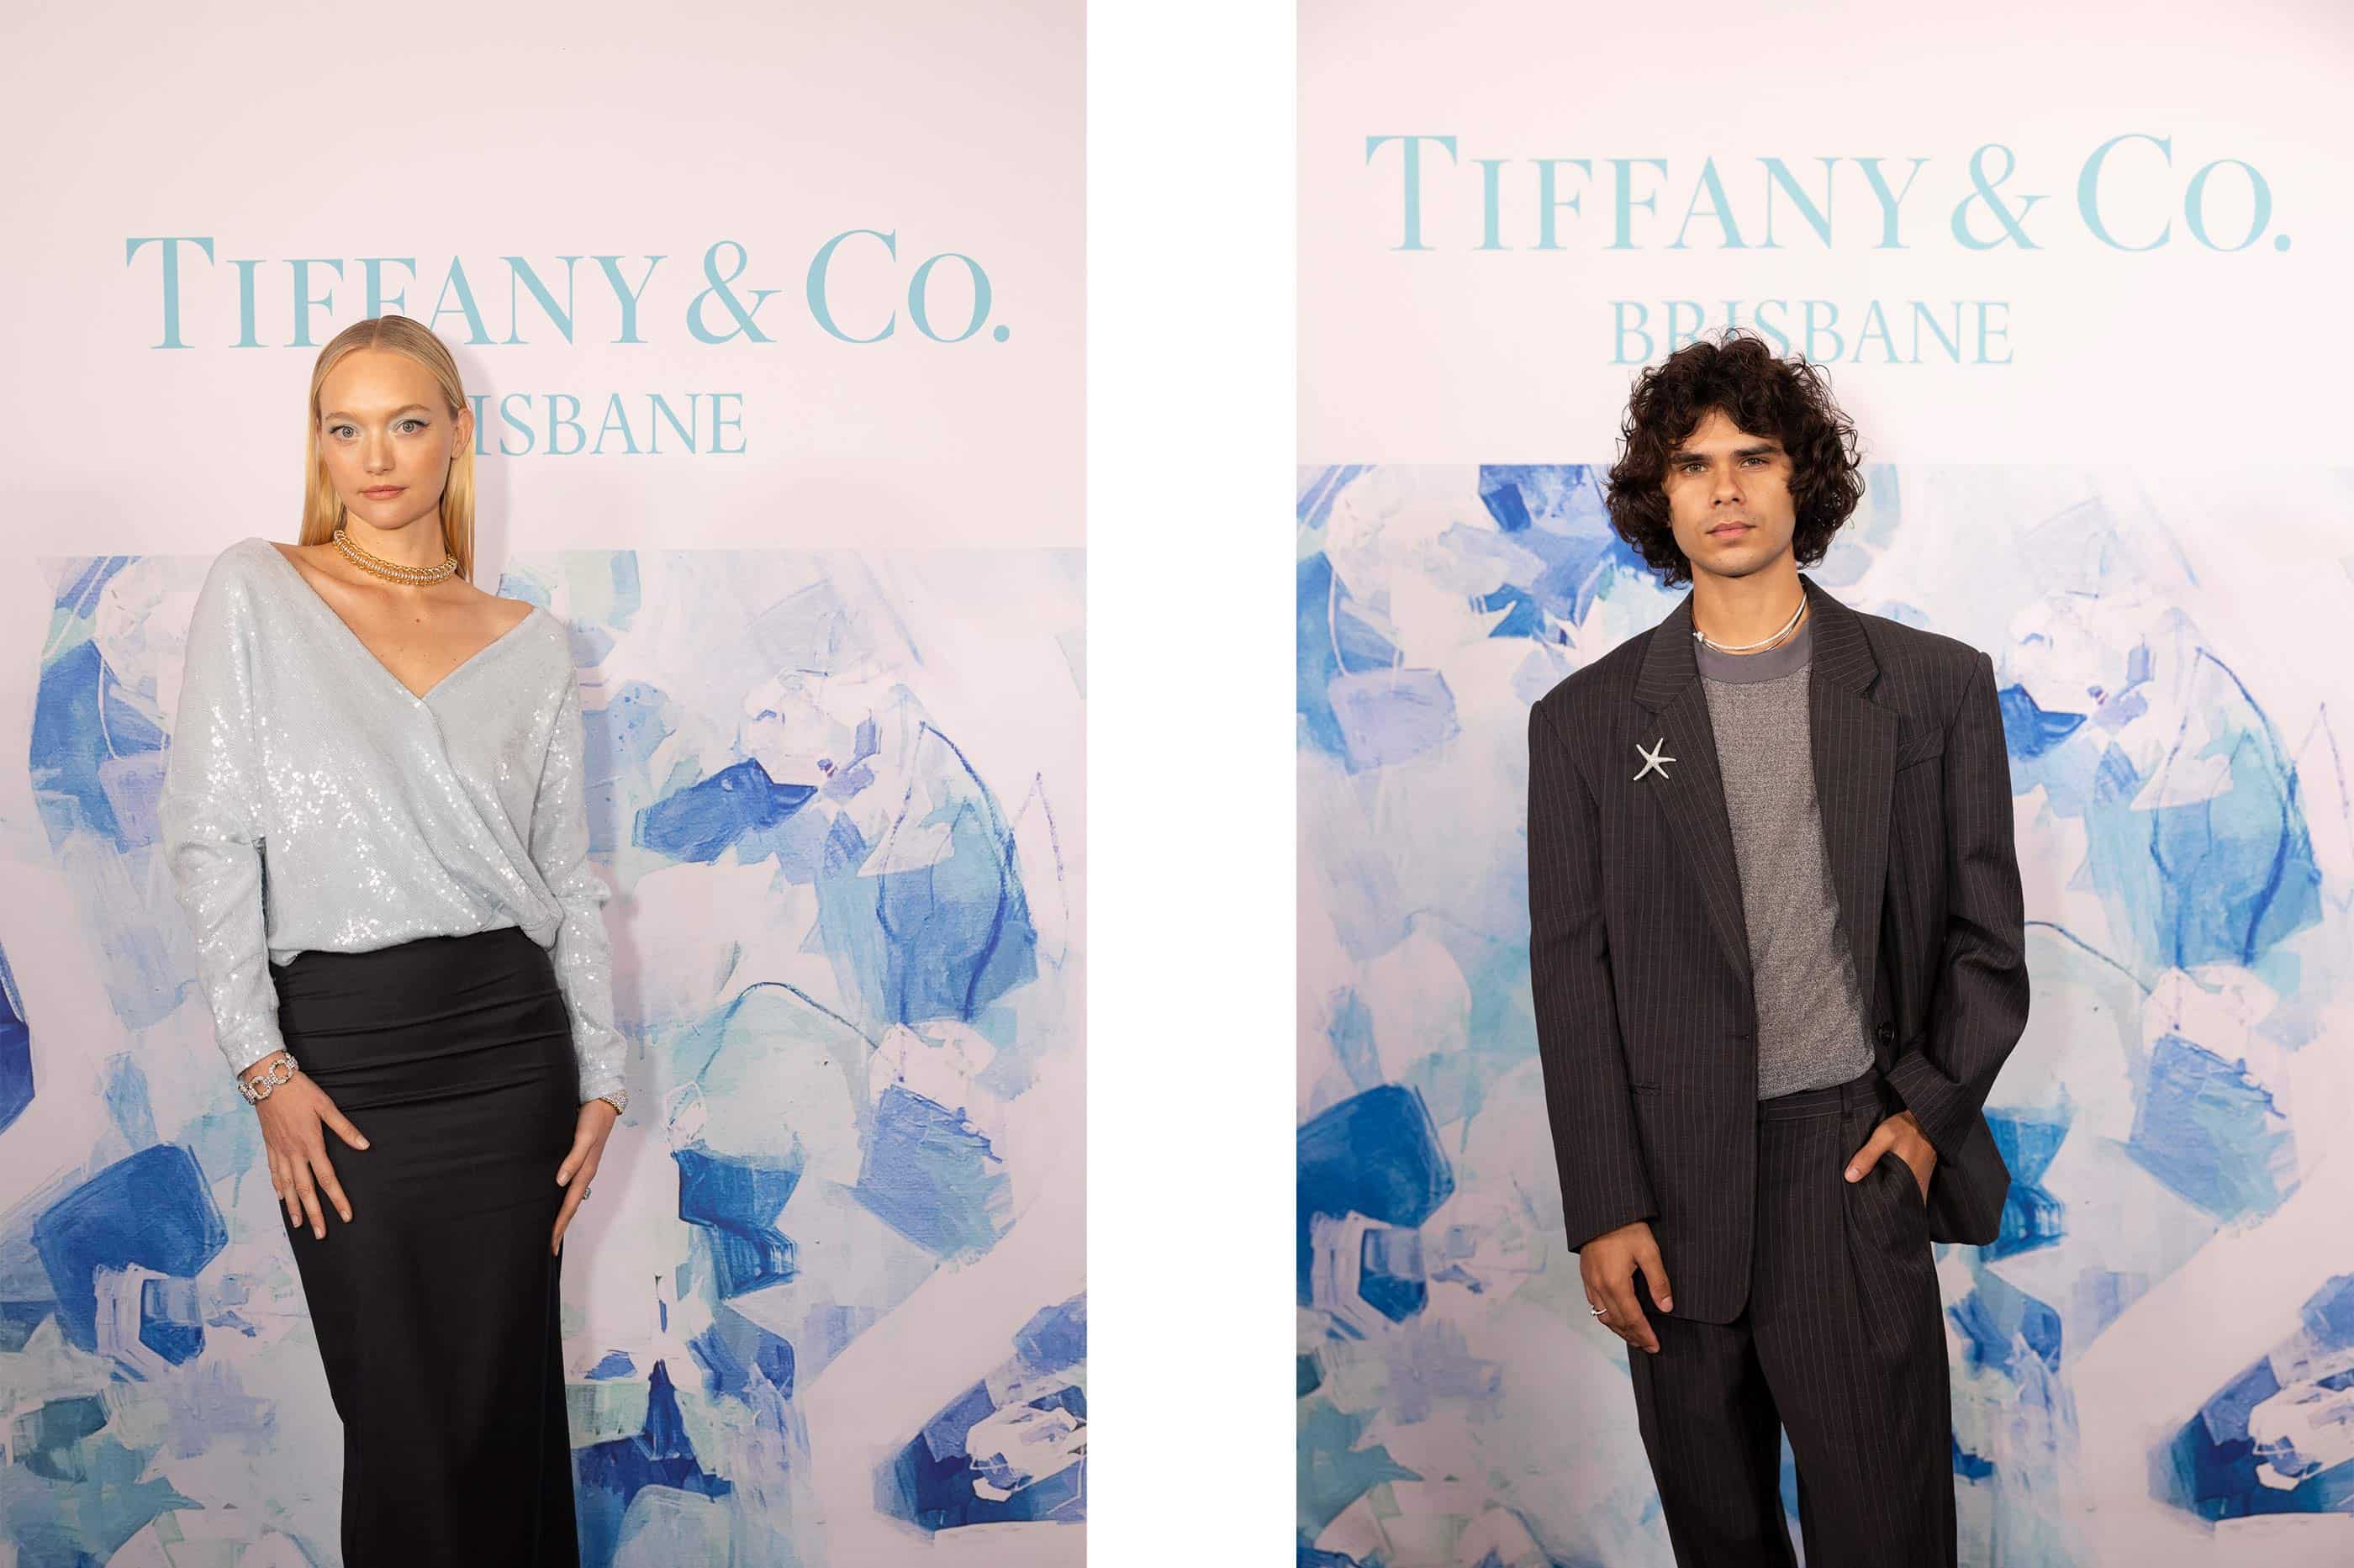 Tiffany & Co. open their latest boutique at QueensPlaza in Brisbane